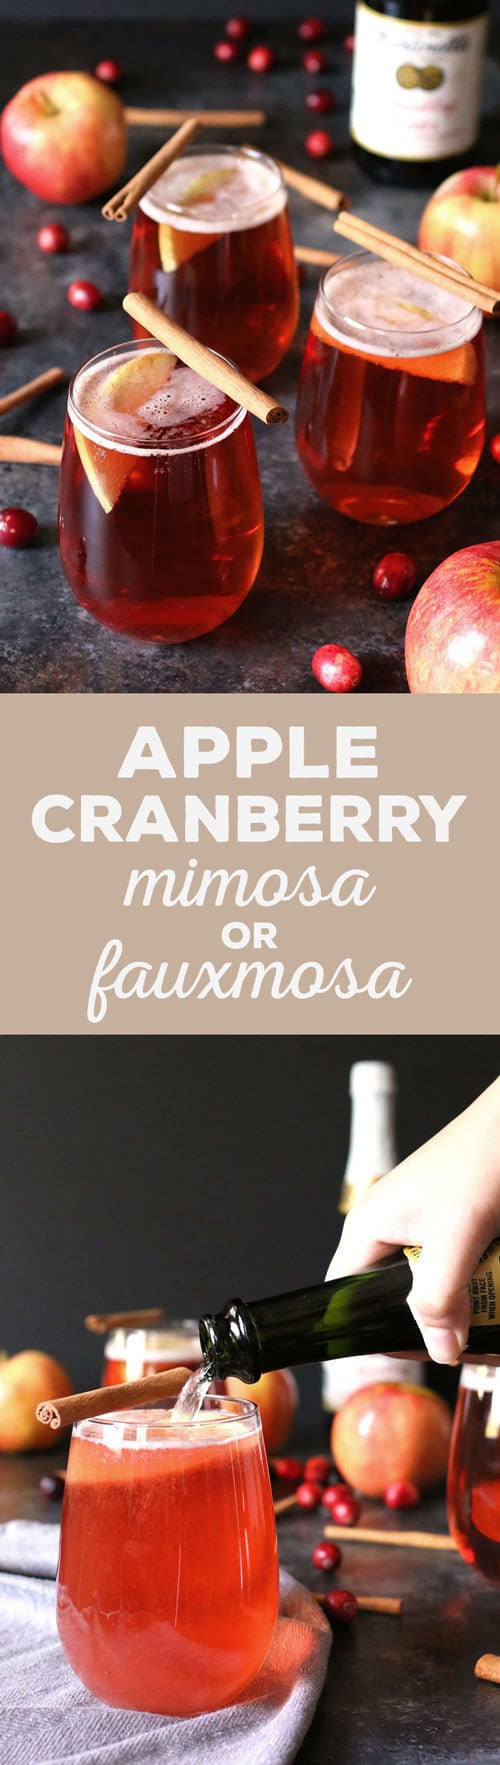 This apple cinnamon cranberry mimosa is the perfect easy holiday drink. It's main ingredient is sparkling apple cider so it can also be made into a fauxmosa! | honeyandbirch.com